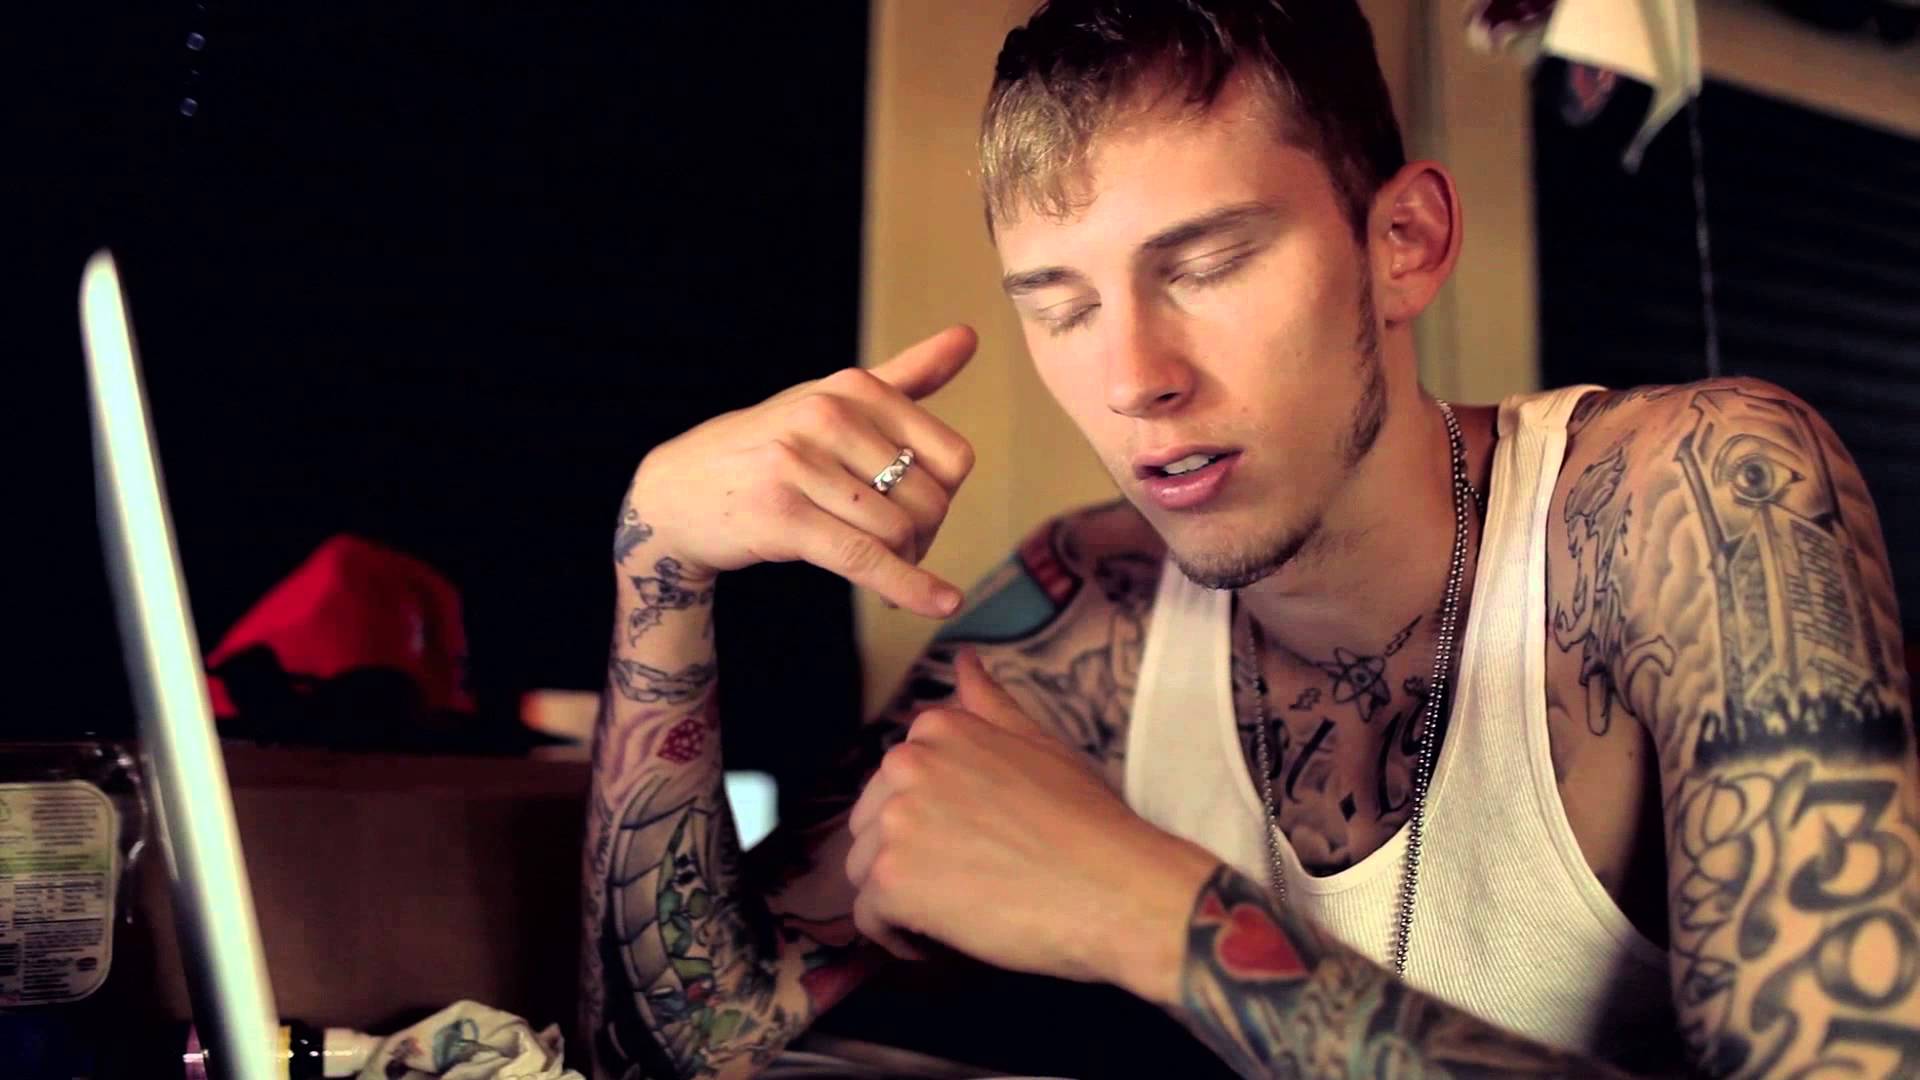 image about Machine Gun Kelly. Young jeezy